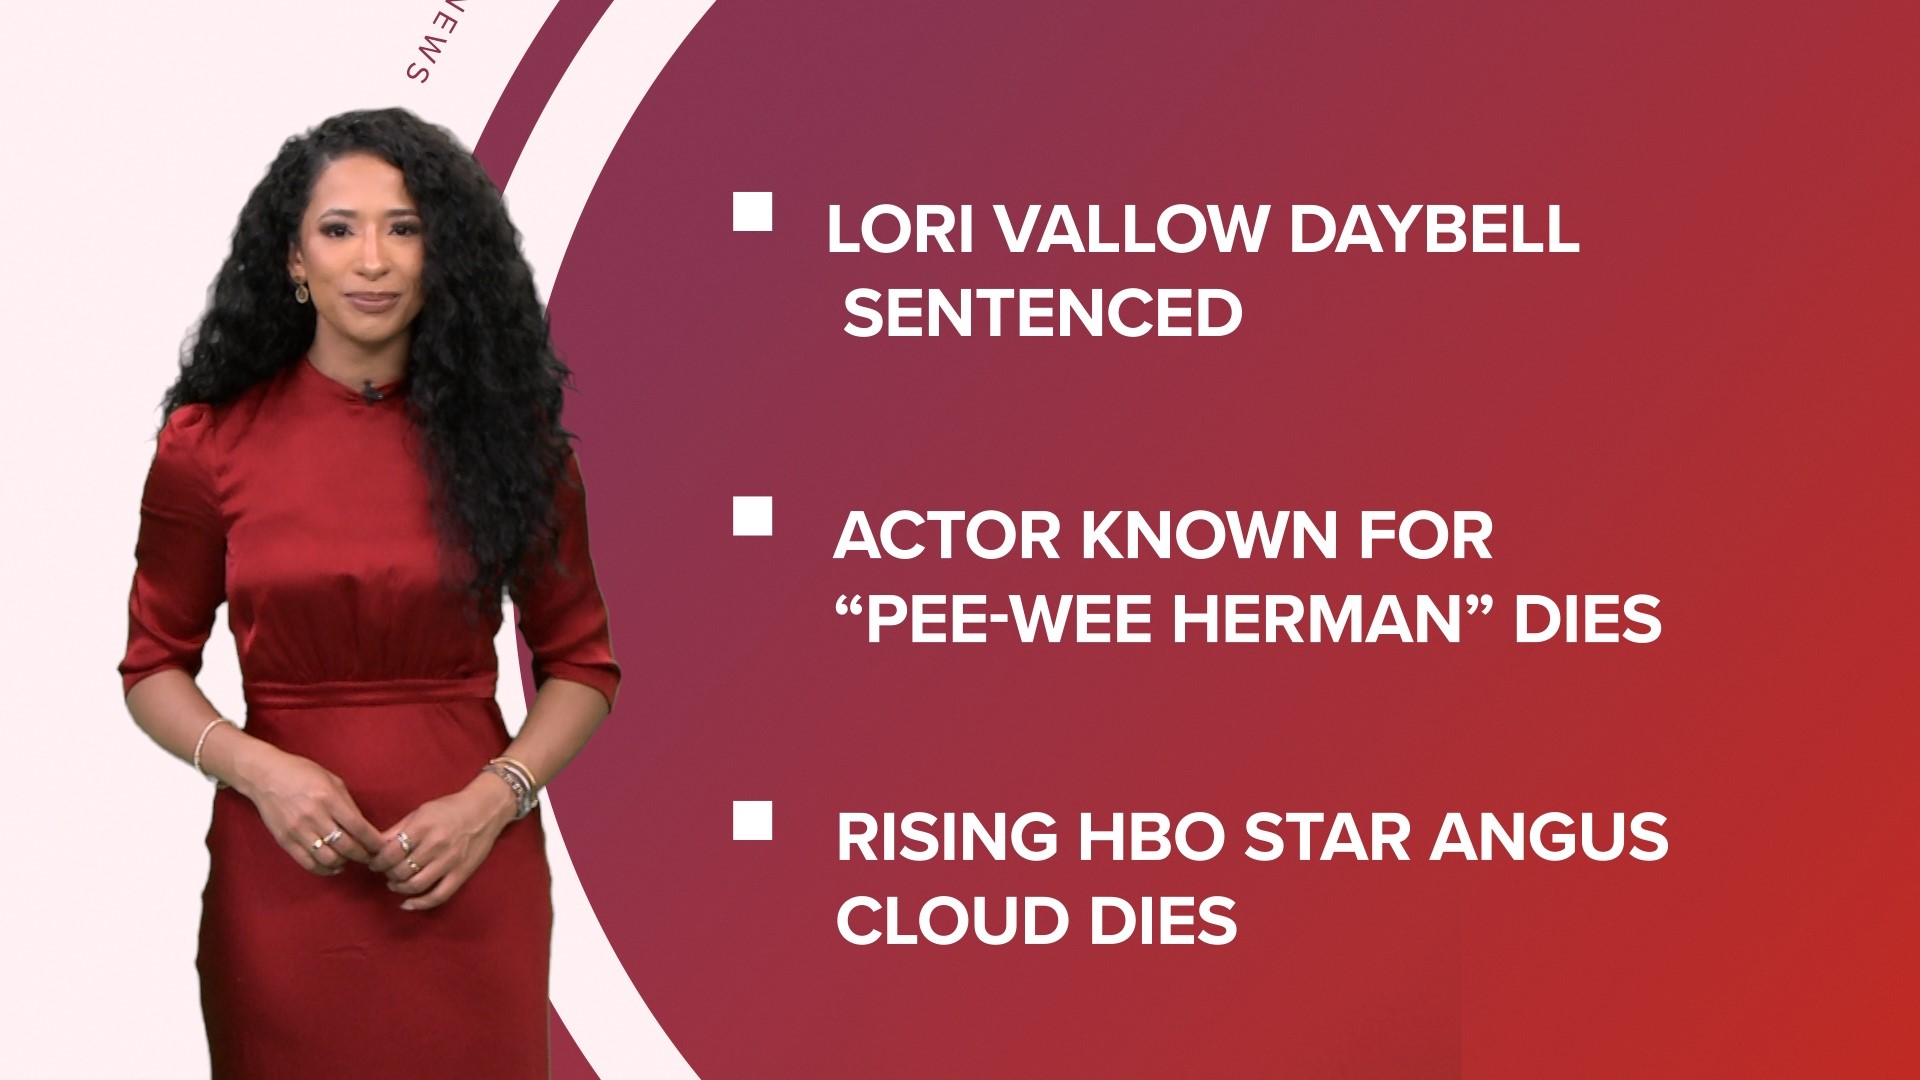 A look at what is happening in the news from Lori Vallow Daybell sentenced to life in prison to the actor known for playing Pee-Wee Herman dying at 70.